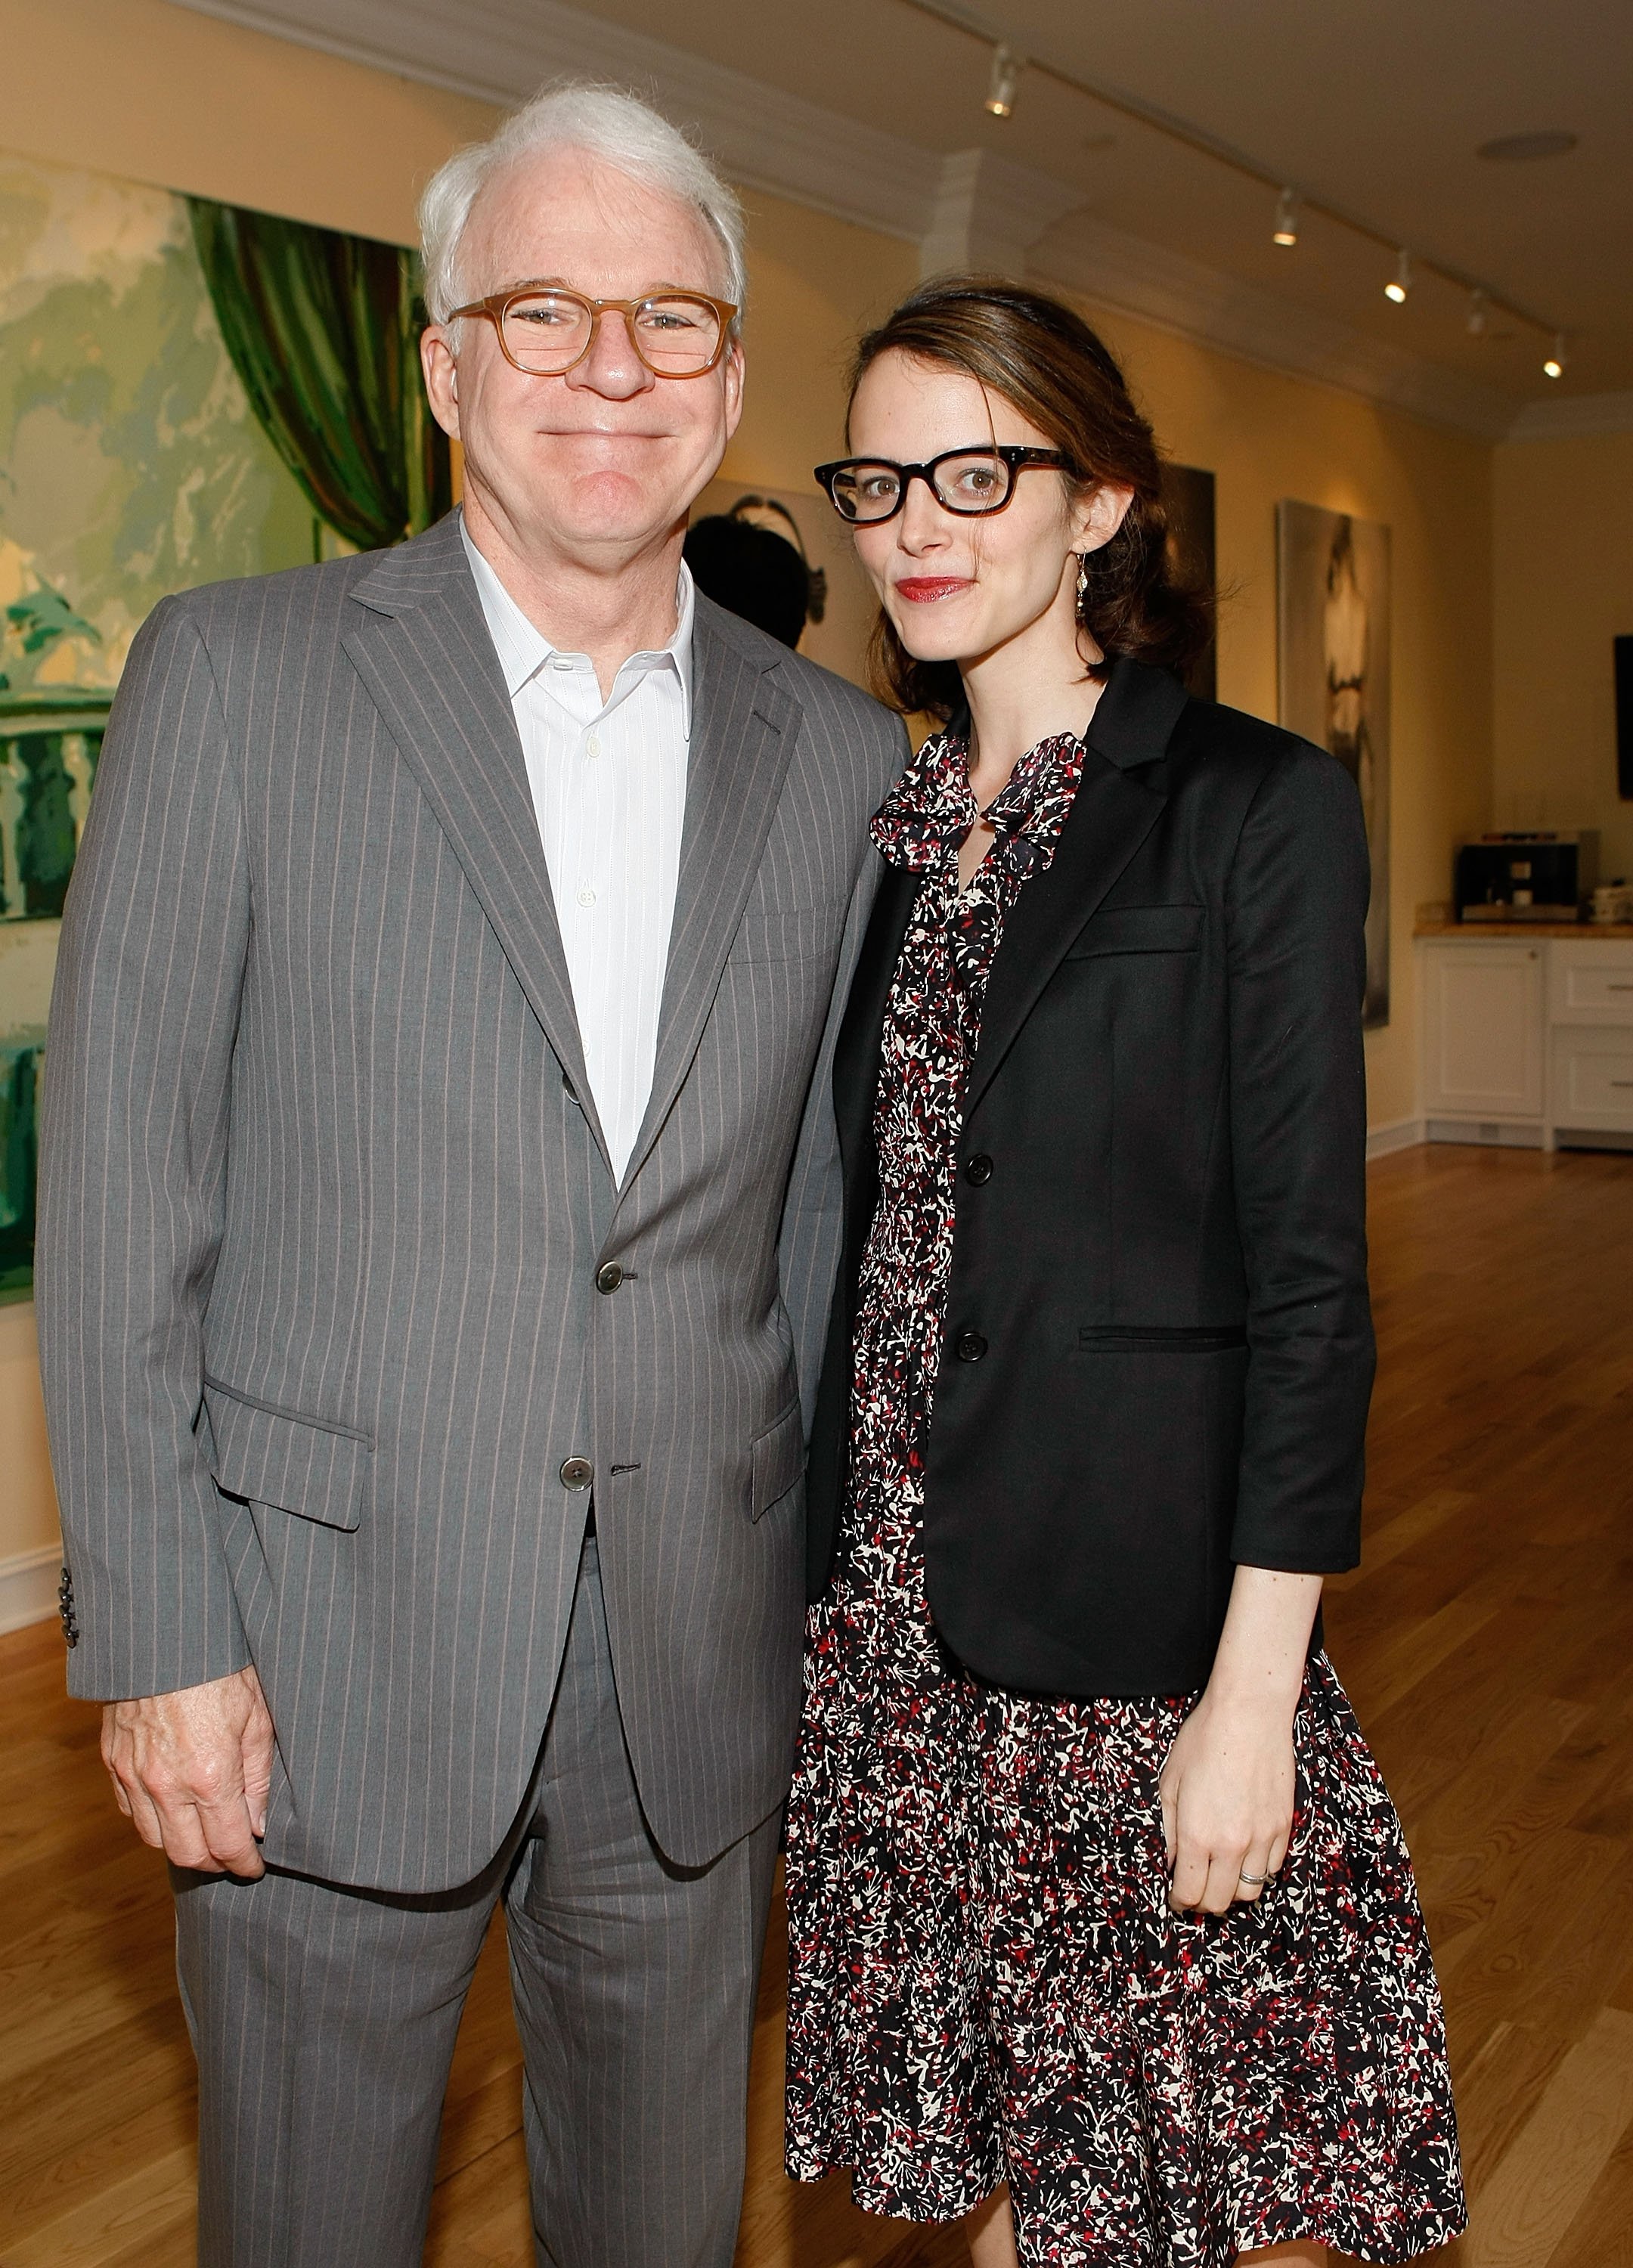 Steve Martin and Anne Stringfield at the presentation of "Wounded" on May 6, 2009, in West Hollywood, California | Source: Getty Images